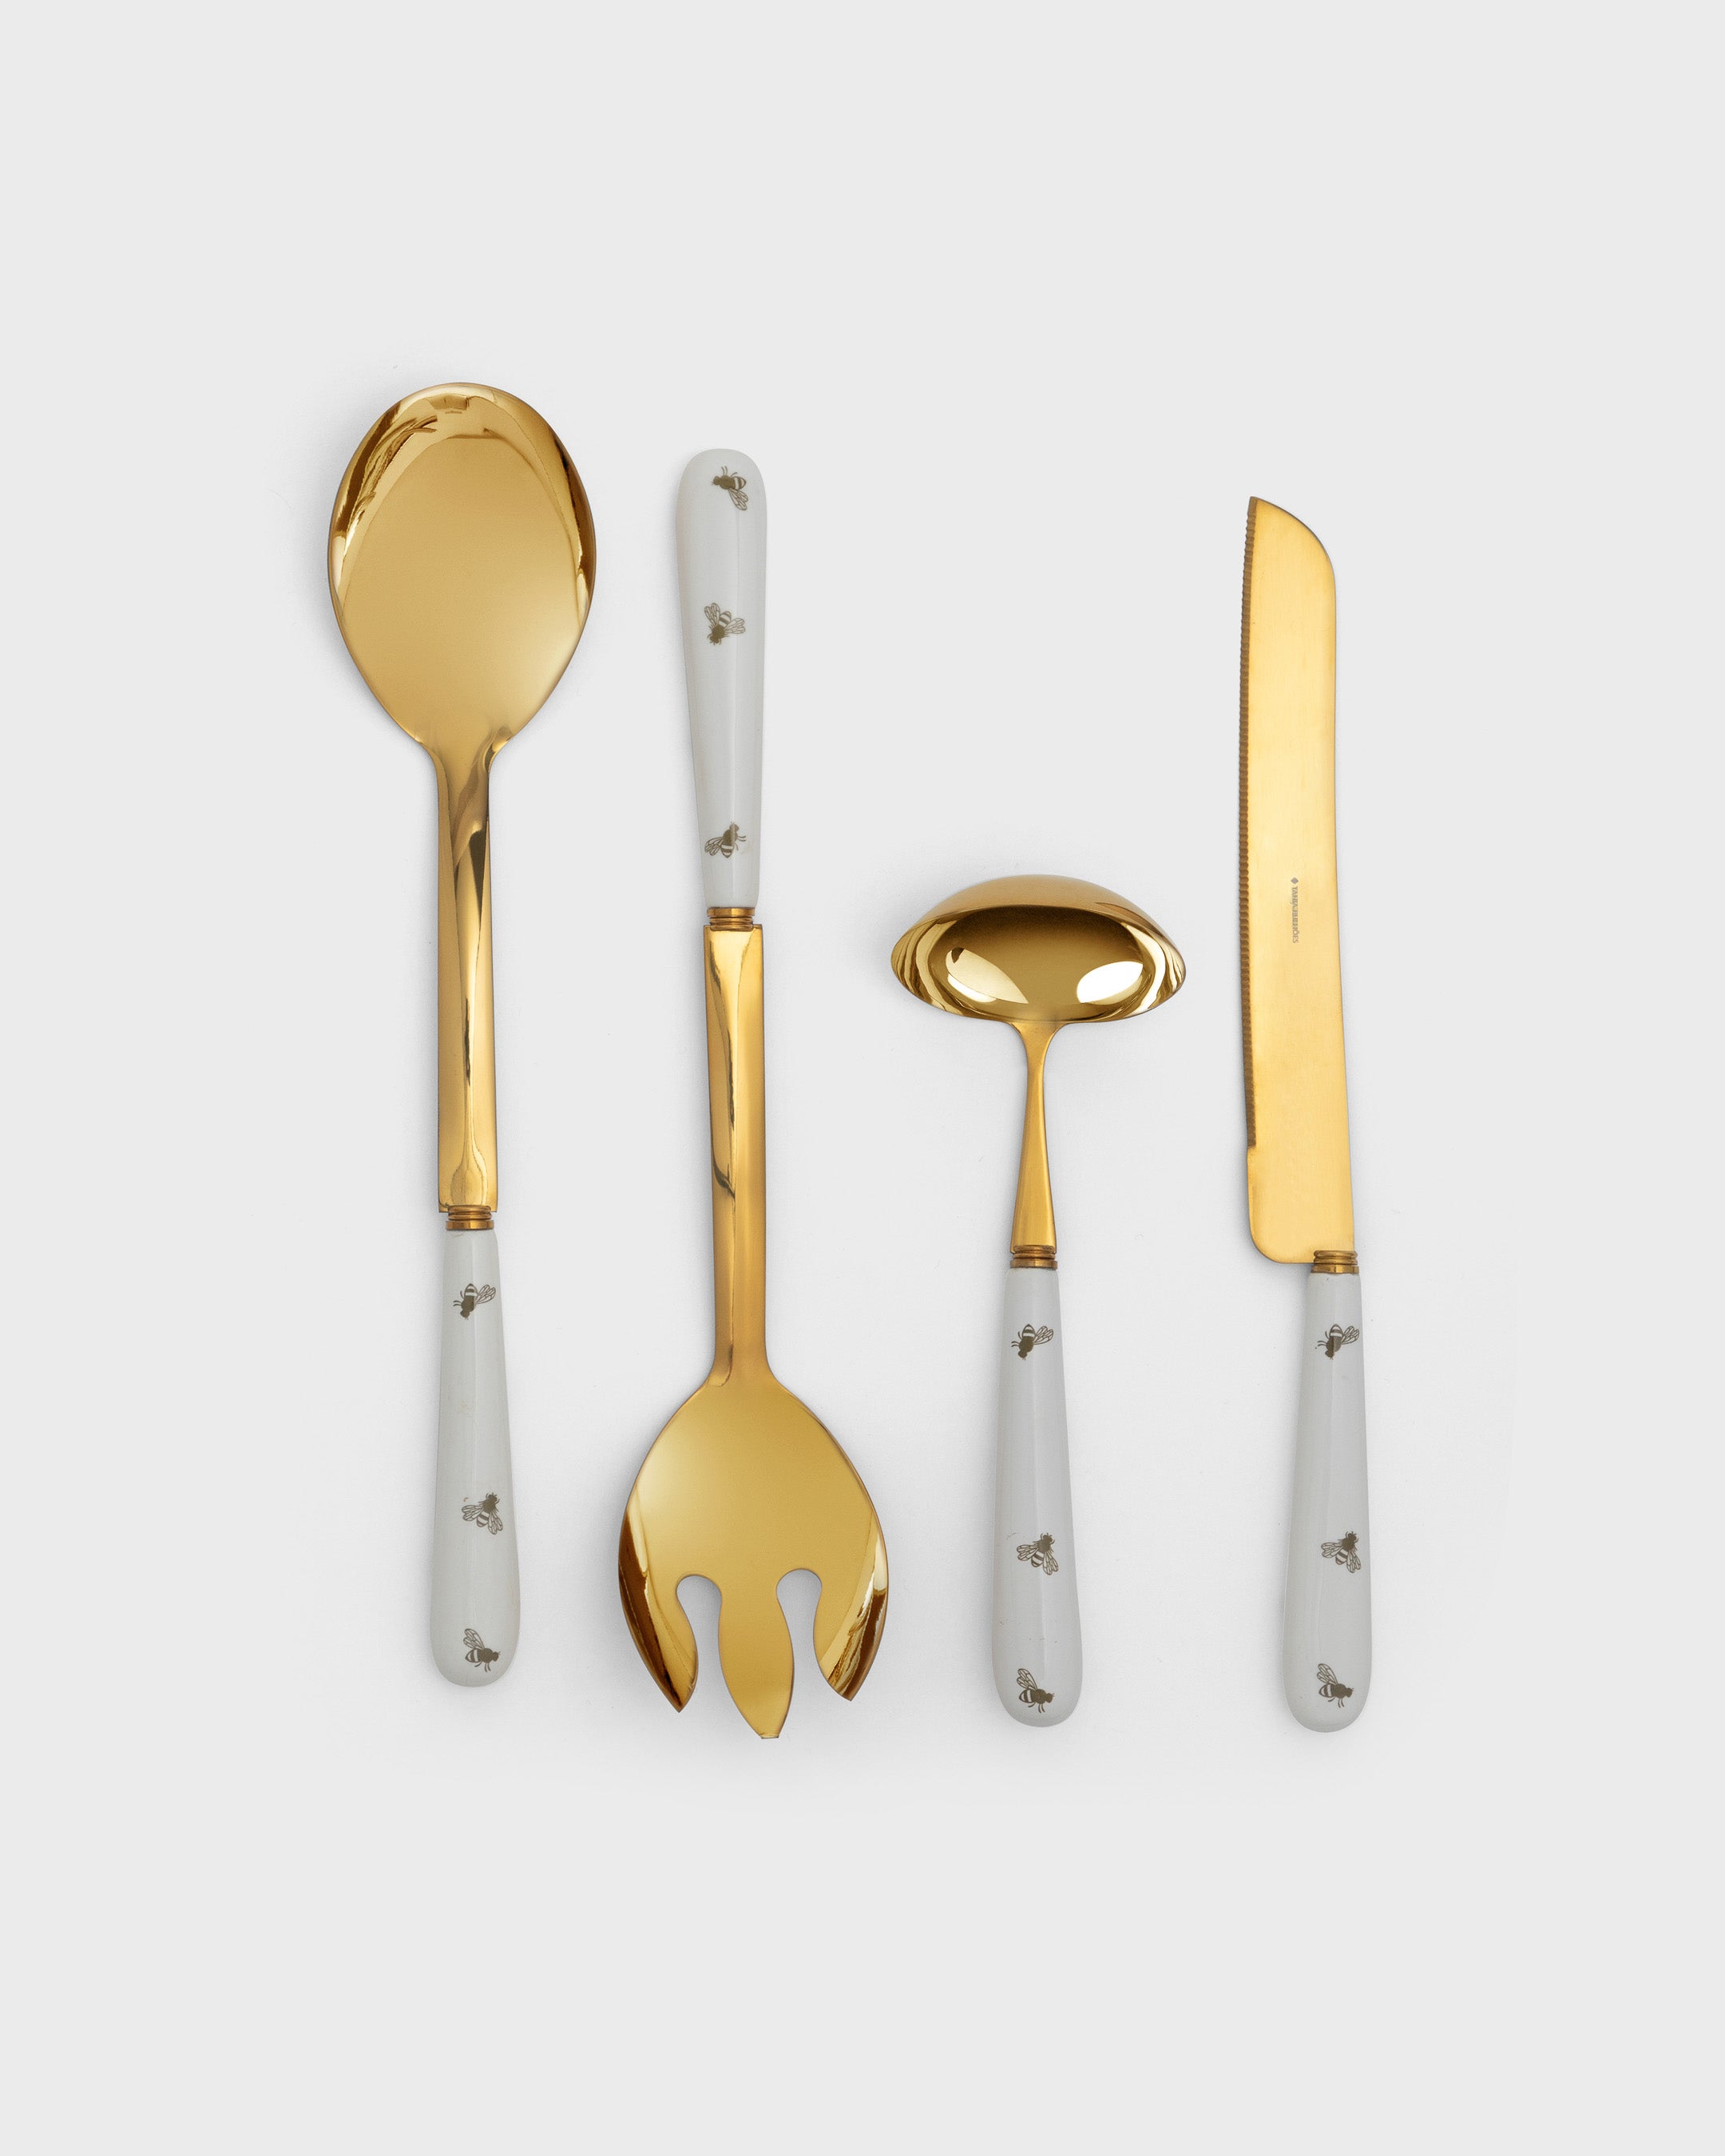 Serving Utensils Colmeia Gold-Plated Stainless Steel Fine Porcelain (4) - Tania Bulhões